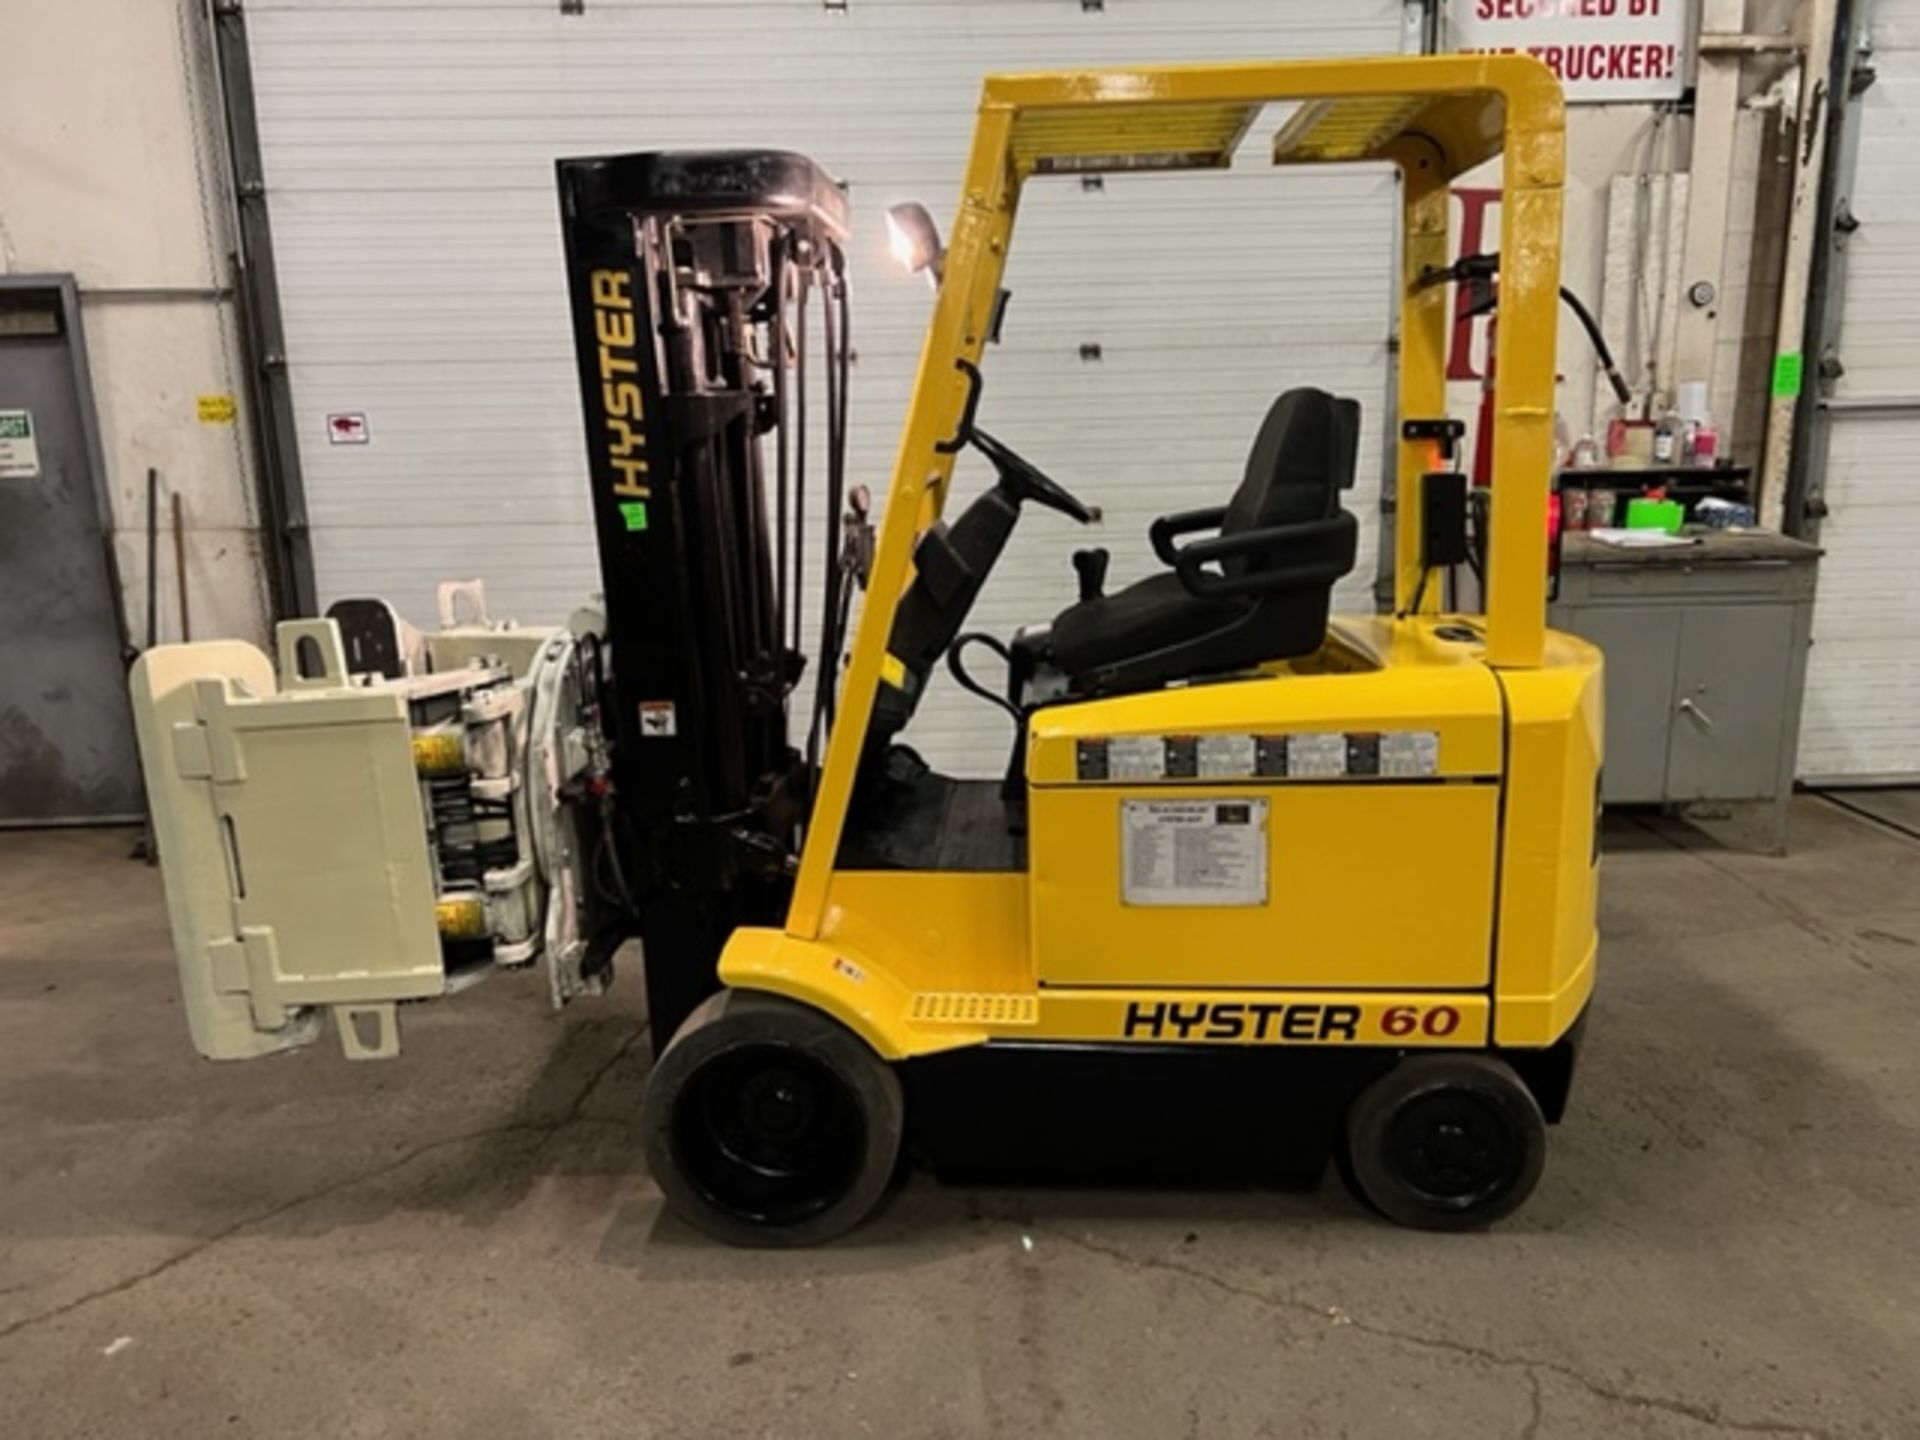 FREE CUSTOMS - NICE Hyster model 60 - 6,000lbs Capacity Forklift Electric with Cascade Grapple